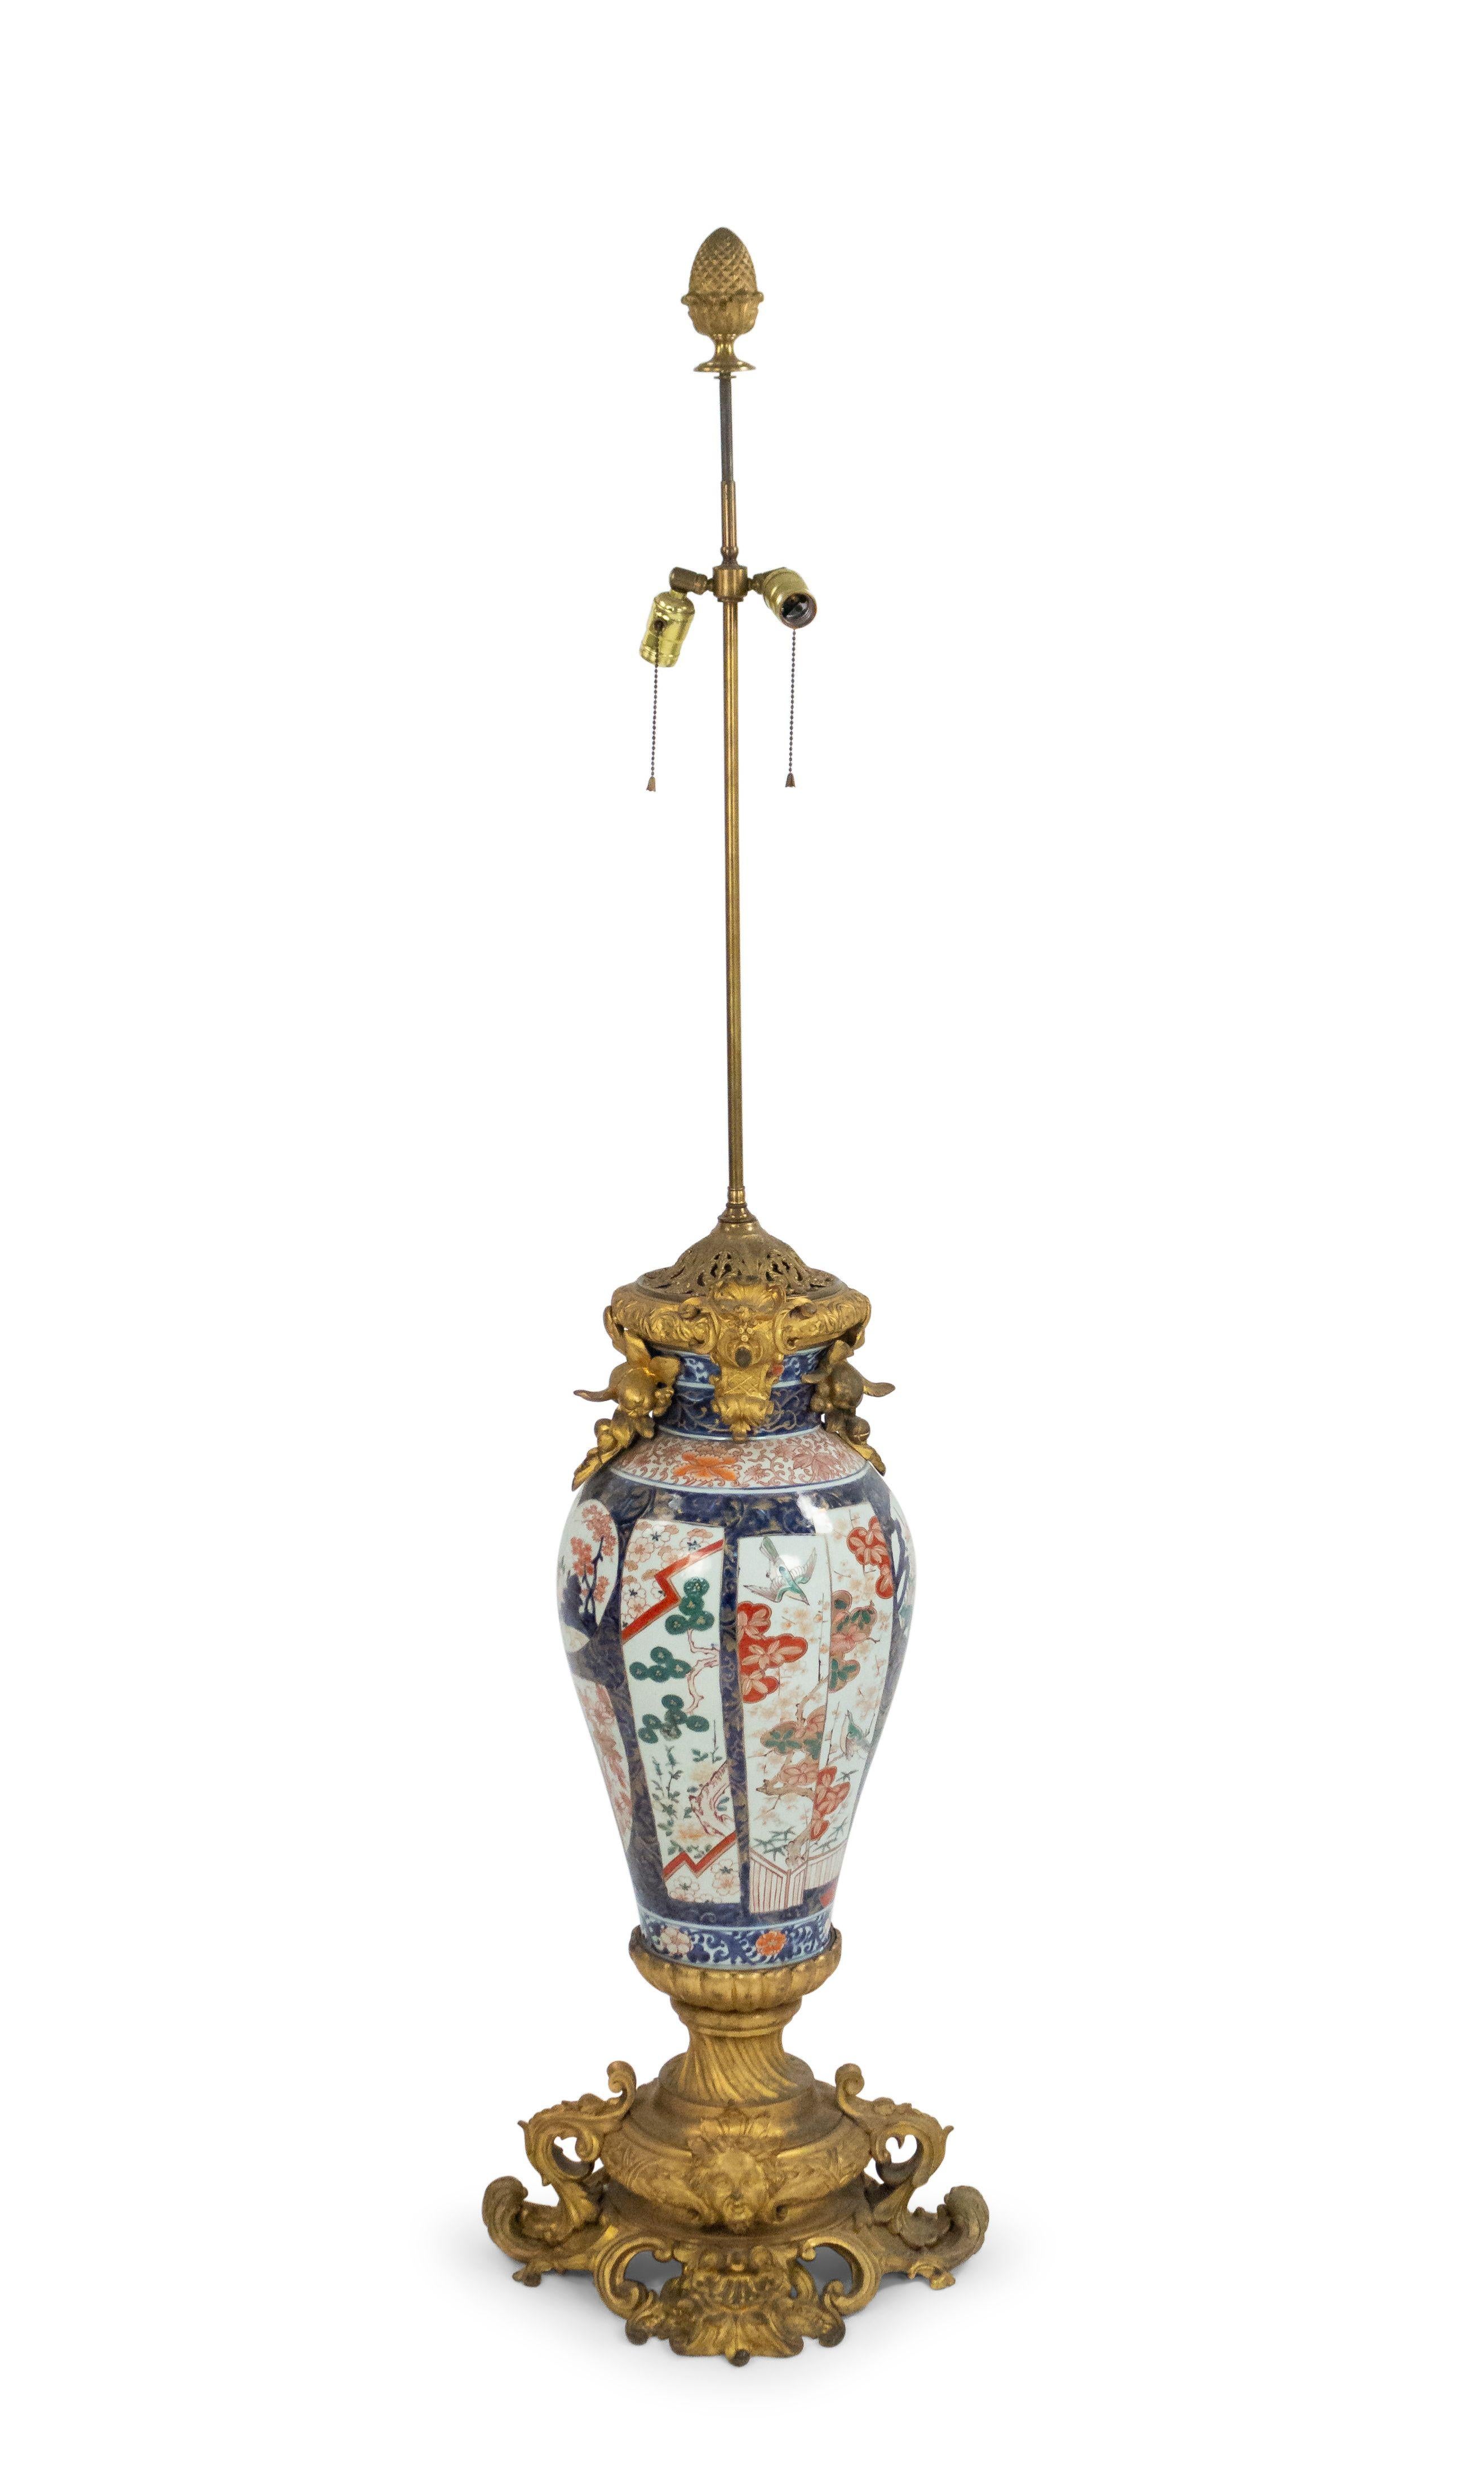 Pair of French Louis XV style (19th century) monumental Imari porcelain and bronze doré palace vases mounted as lamps.